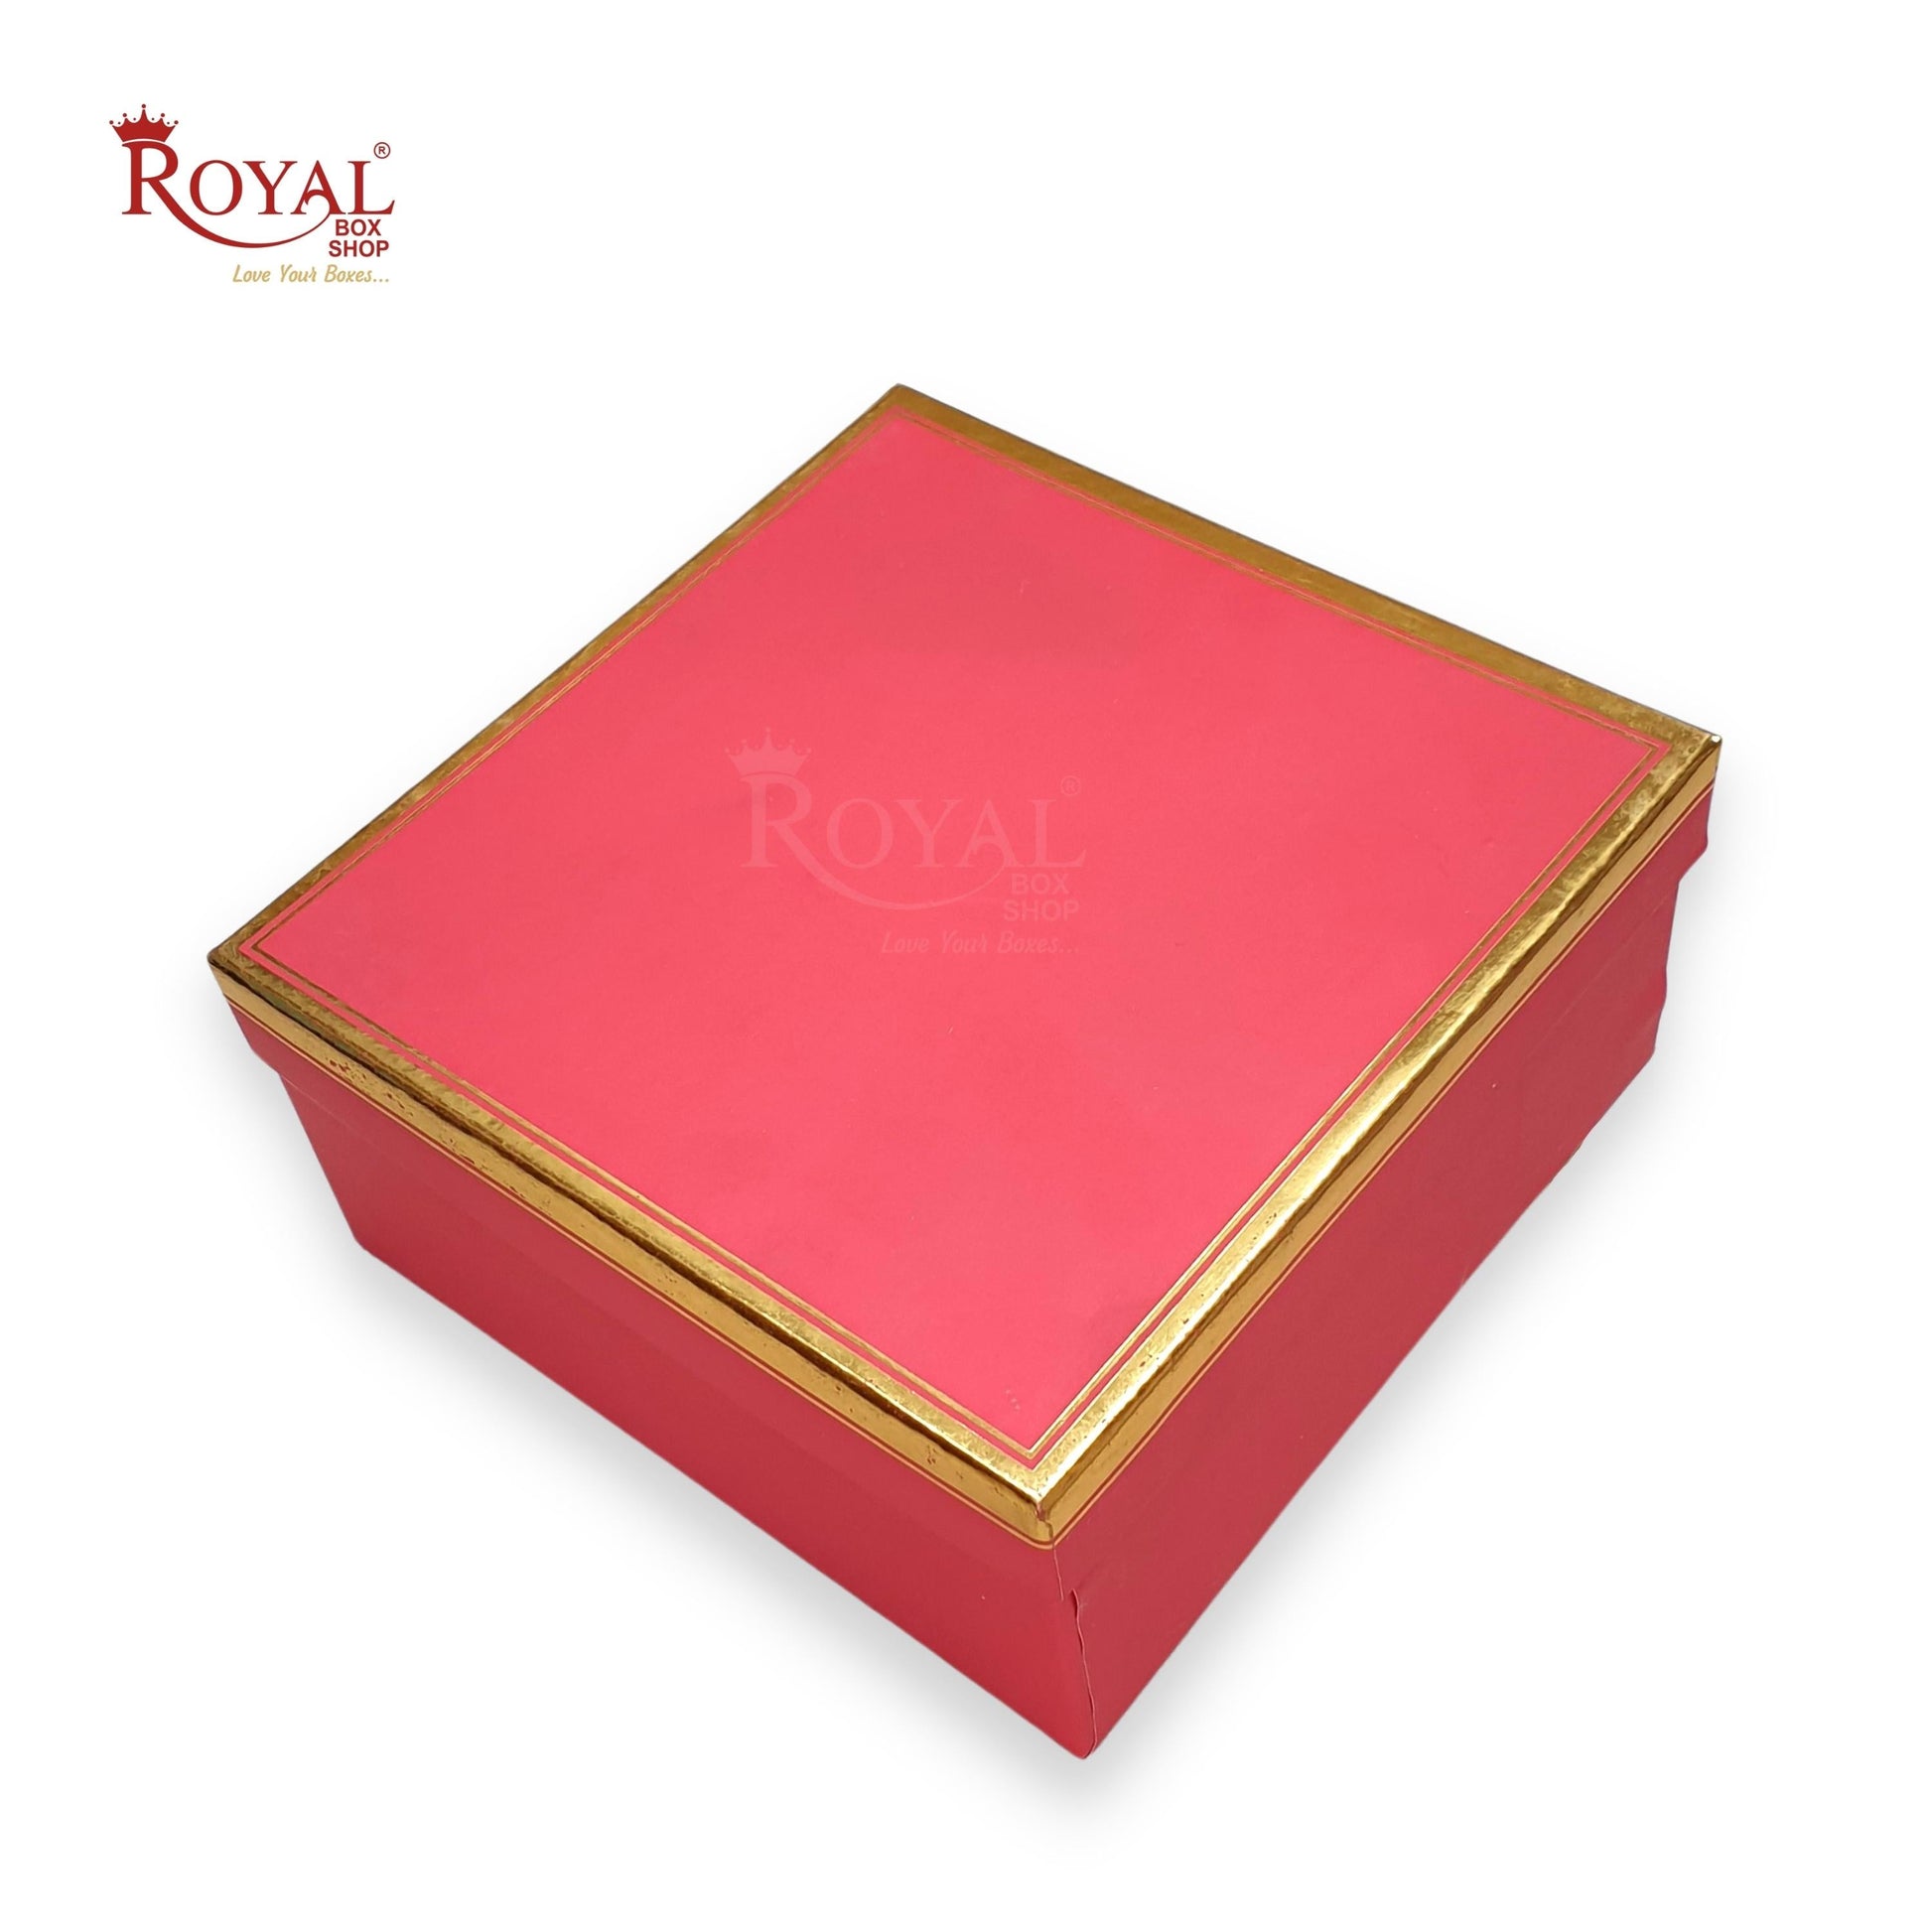 Hamper Gift Boxes I 8x8x4 Inches I Red with Gold Foiling I For Return Wedding Corporate Hamper Gifts Box Royal Box Shop